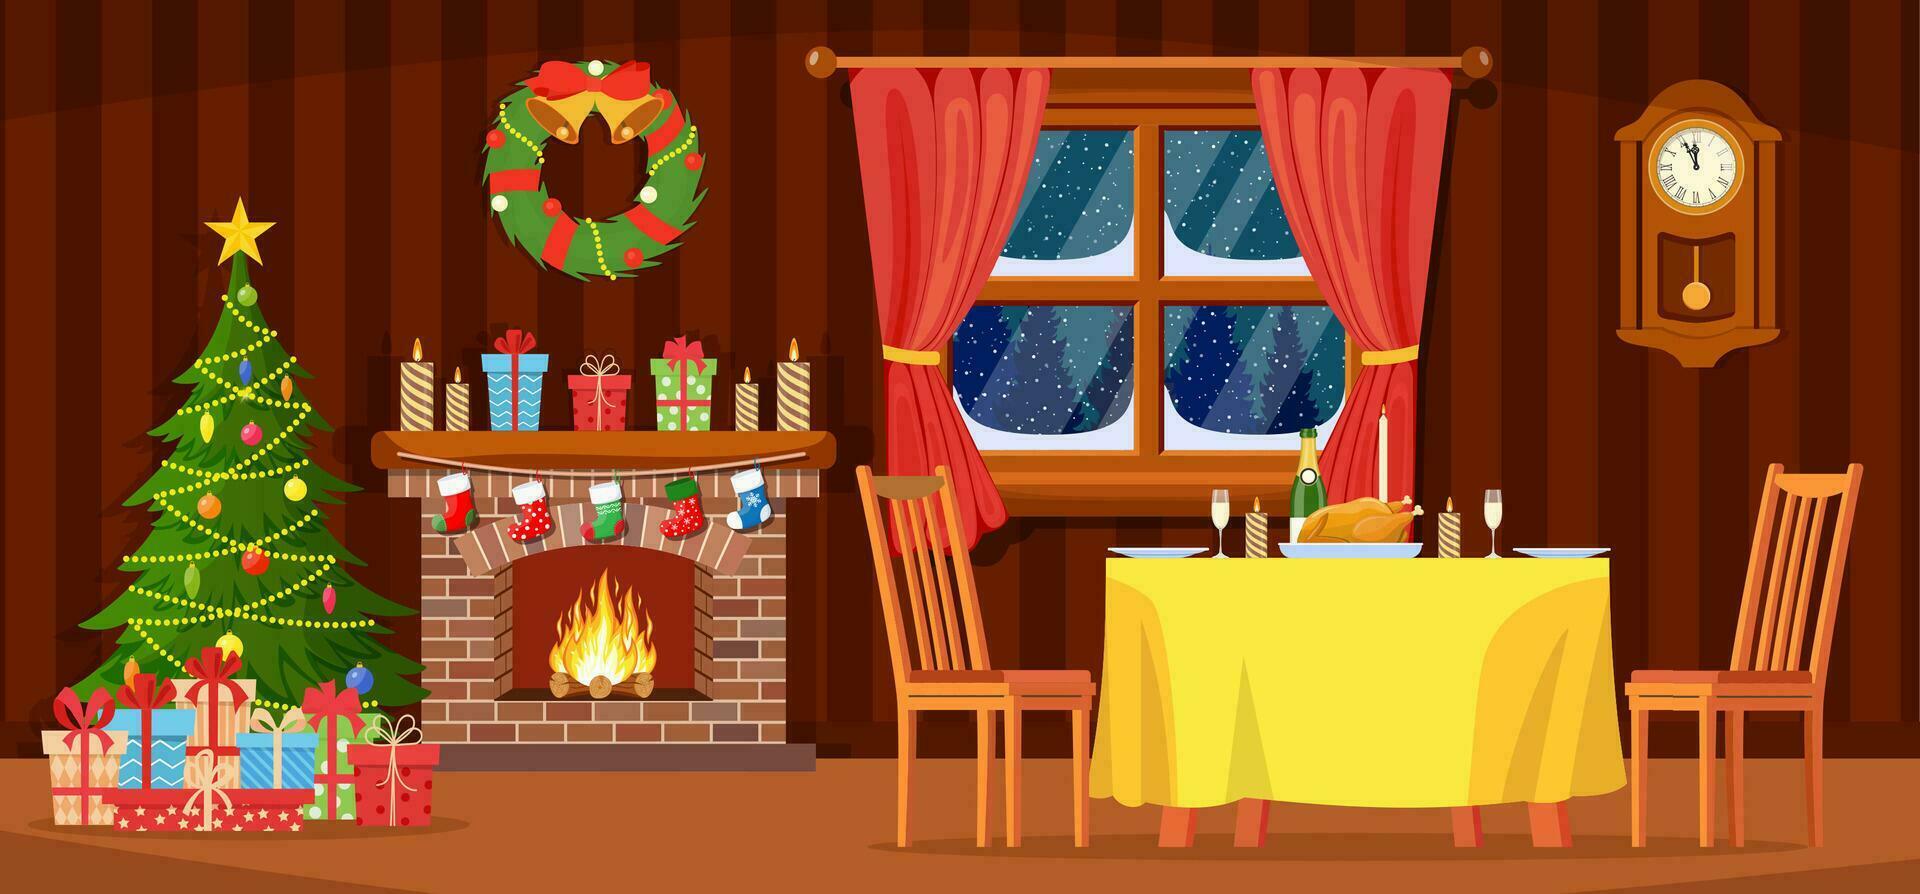 Festive interior of living room, new year. Christmas tree, gifts above fireplace for new year, festive table, beautiful furniture, fireplace, Christmas wreath, decorations. vector